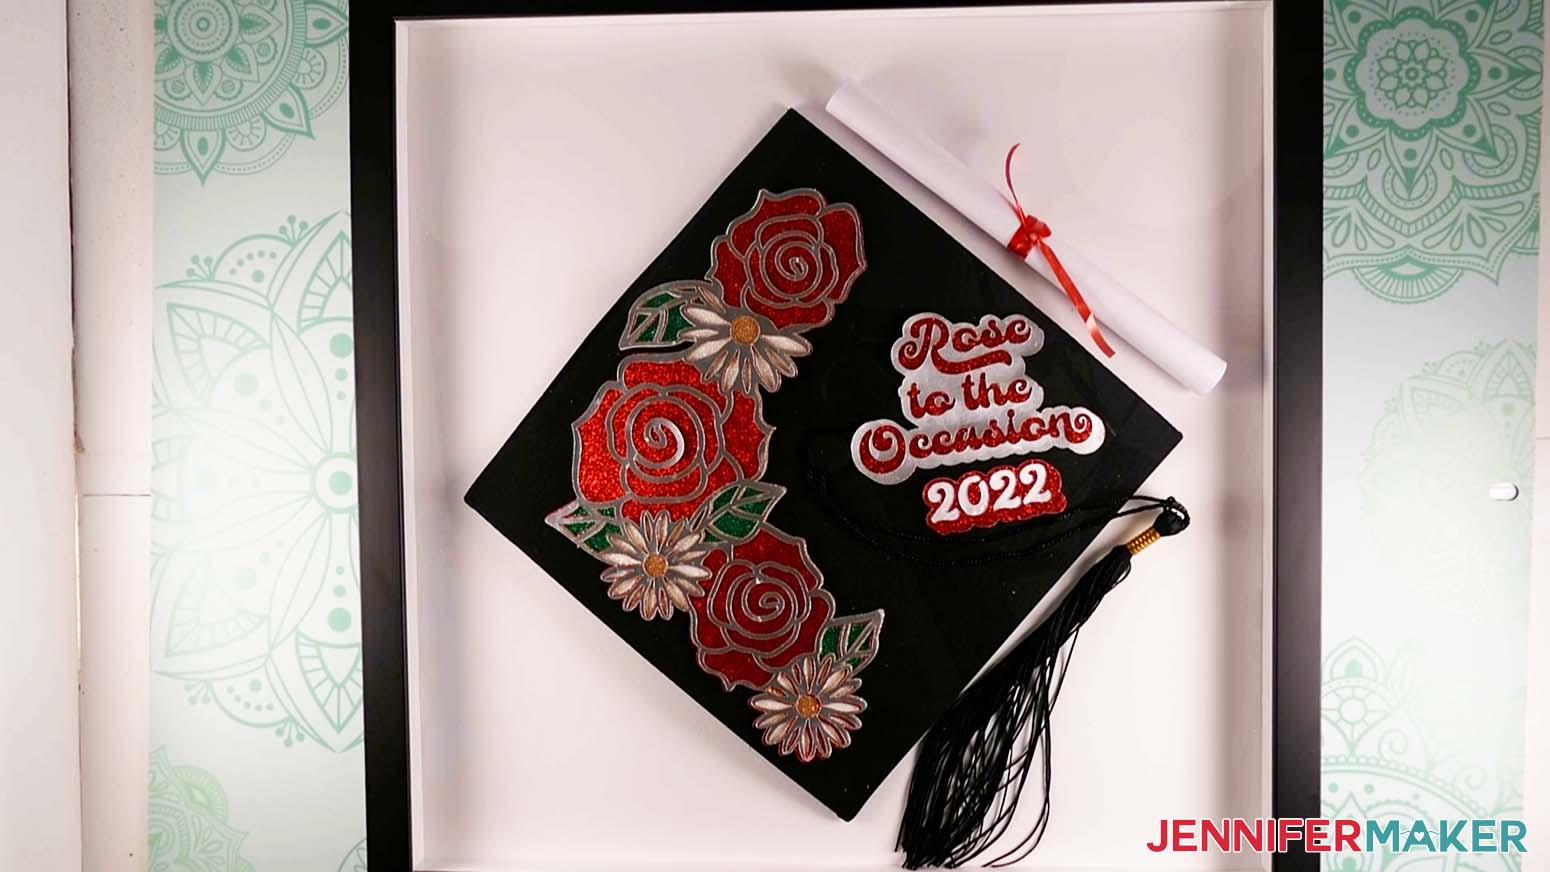 A shadow box with an assembled Rose Graduation Cap and diploma displayed inside